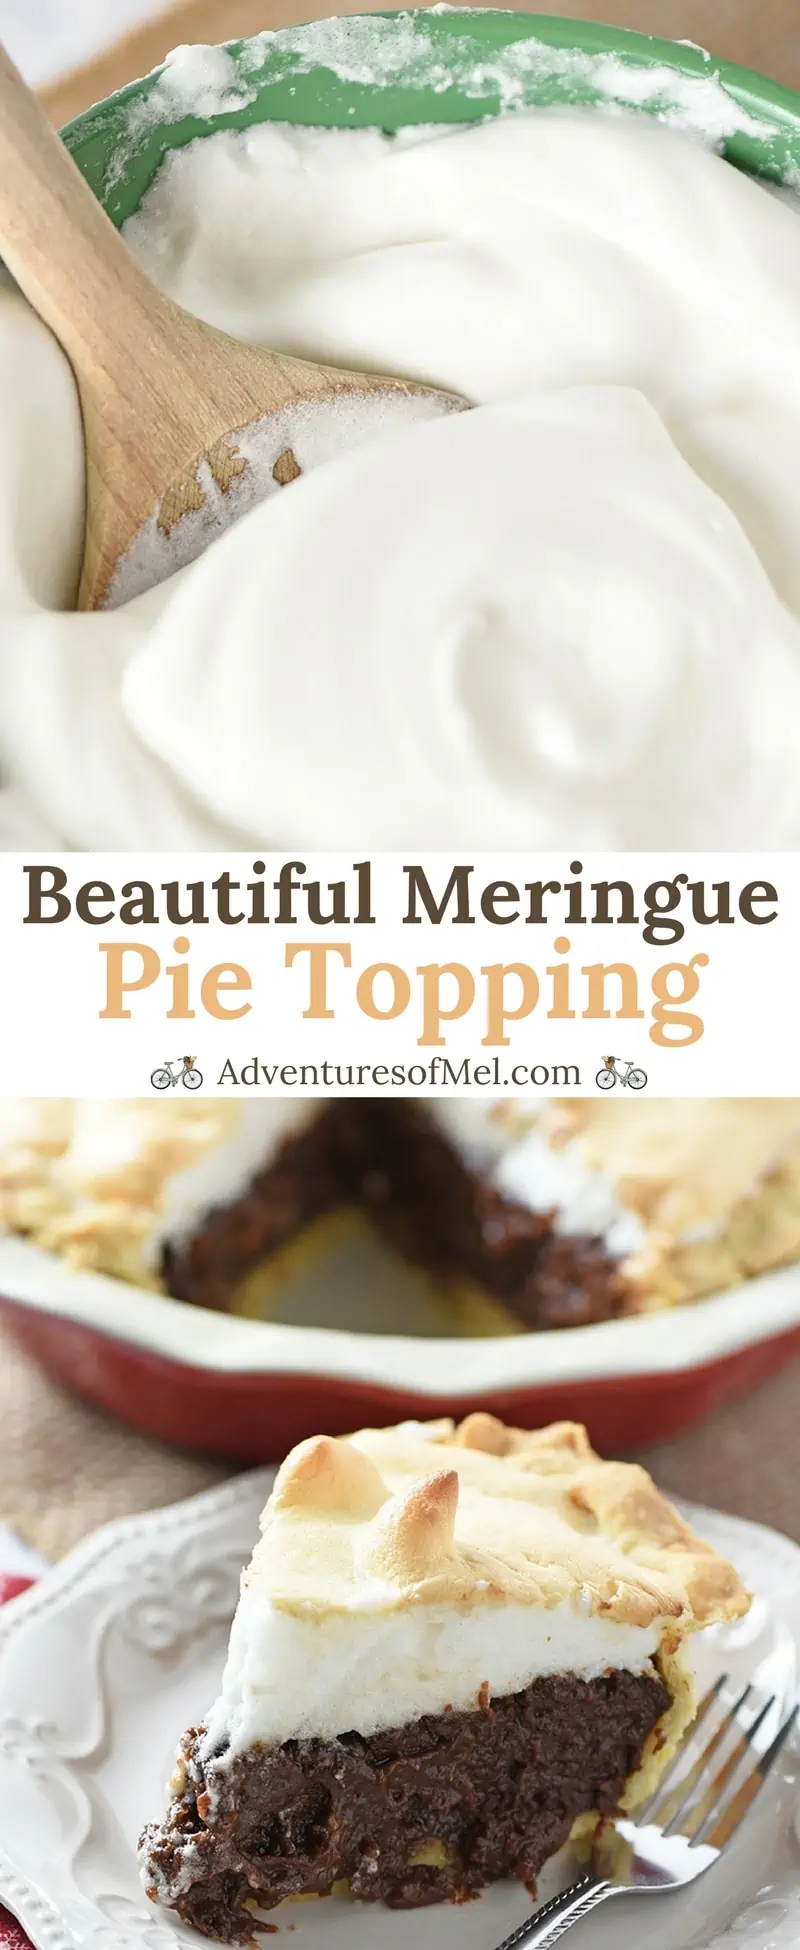 Meringue Pie Topping doesn't have to be so intimidating. This recipe makes a beautiful meringue that's light, fluffy, and melt-in-your-mouth scrumptious!